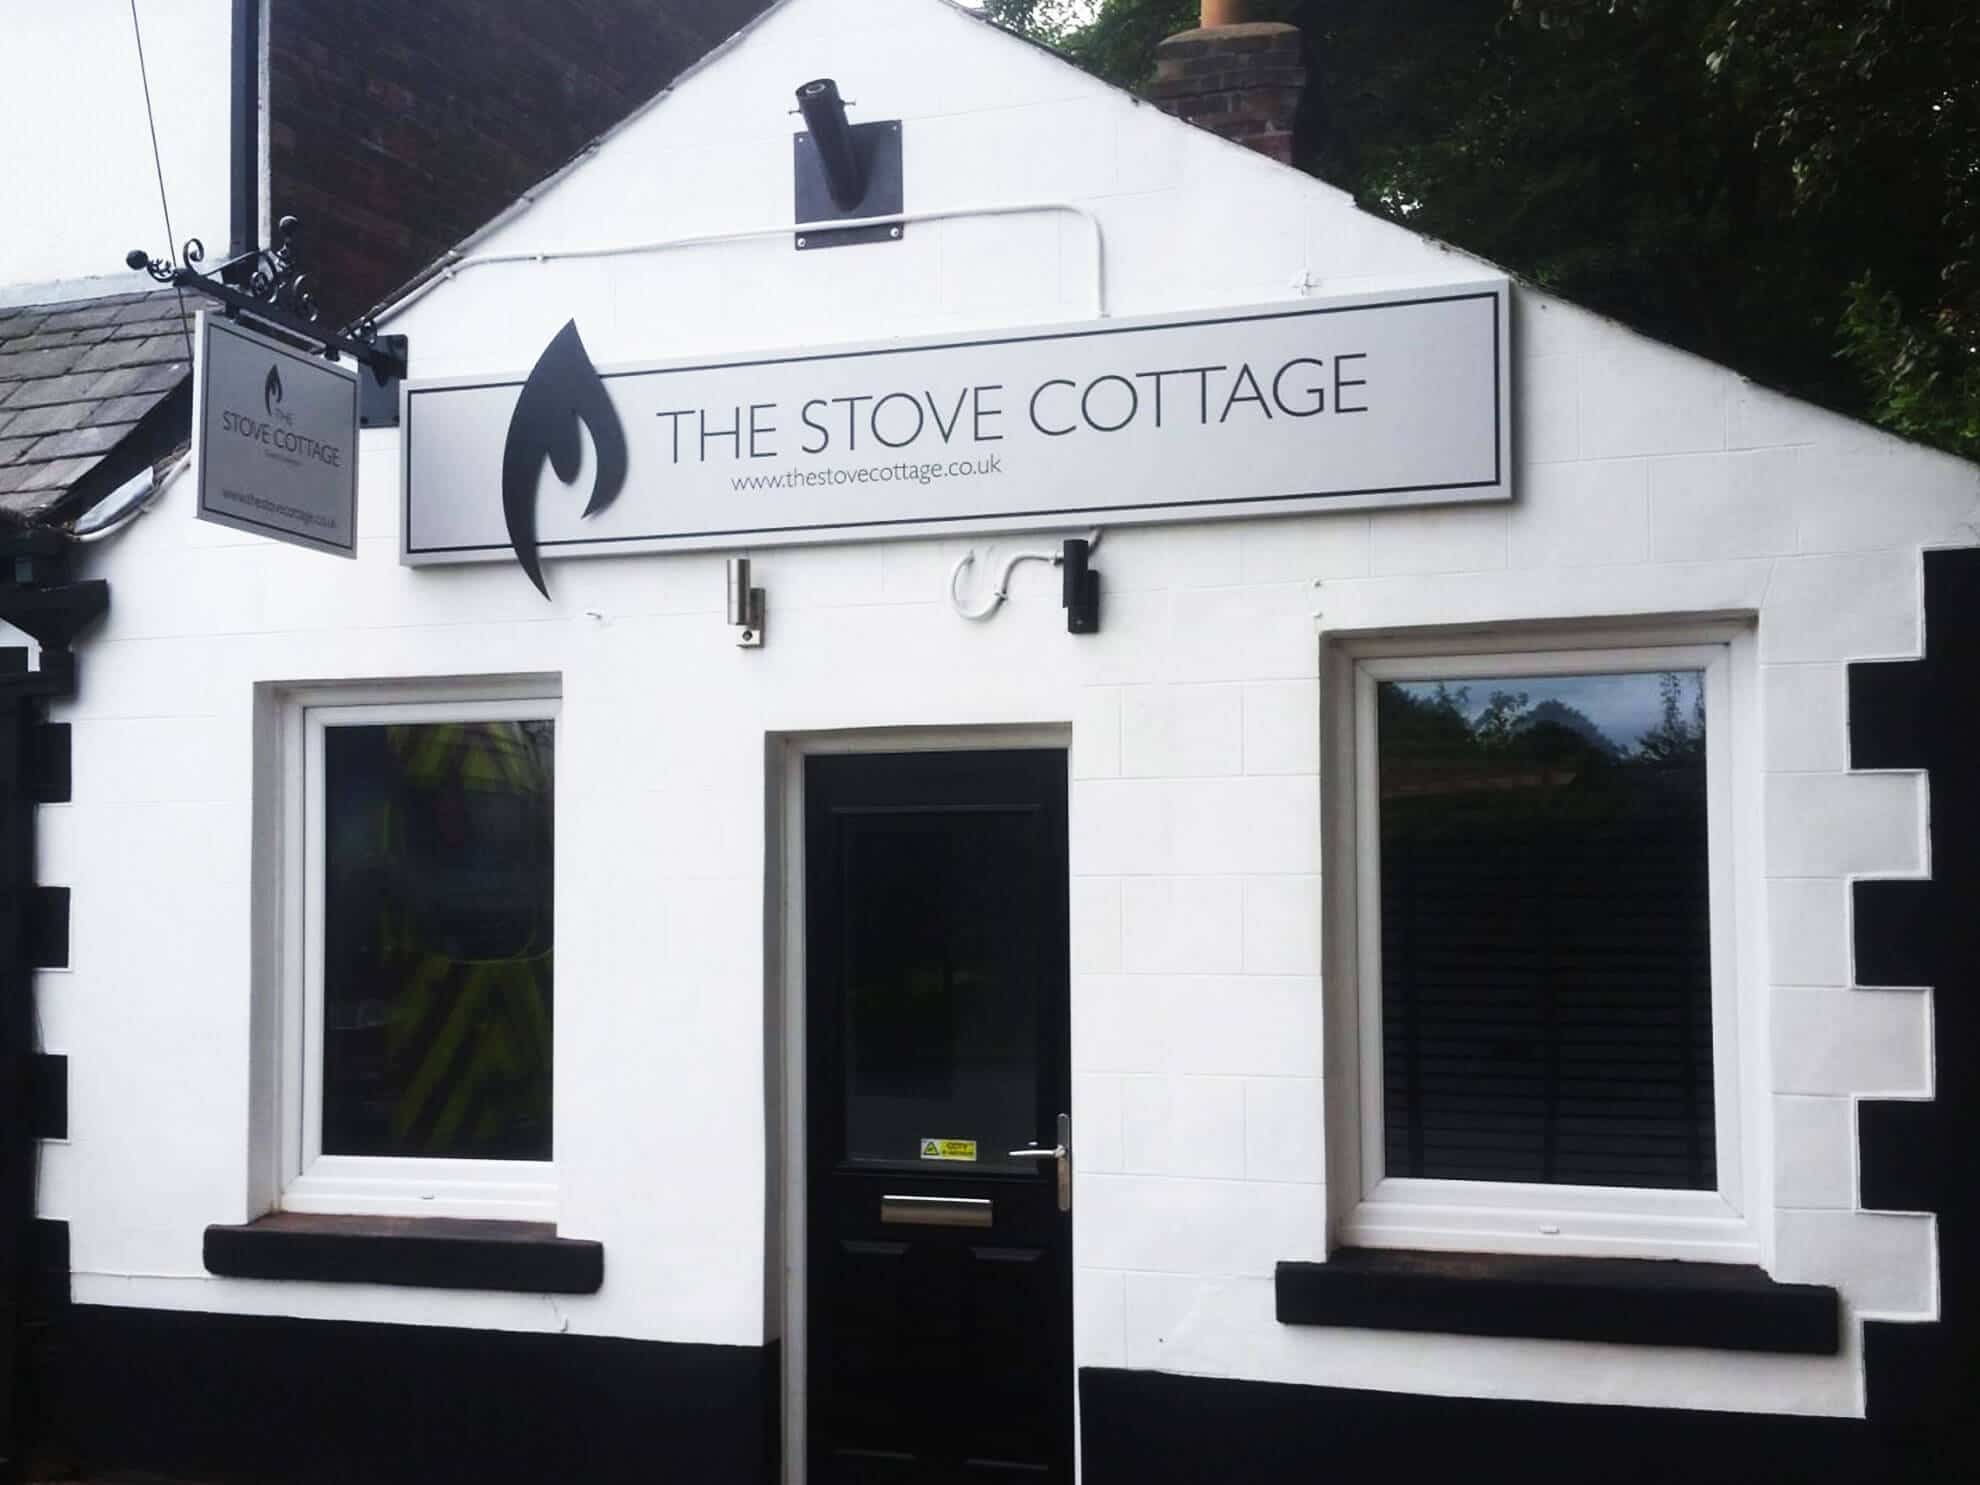 The Stove Cottage sign